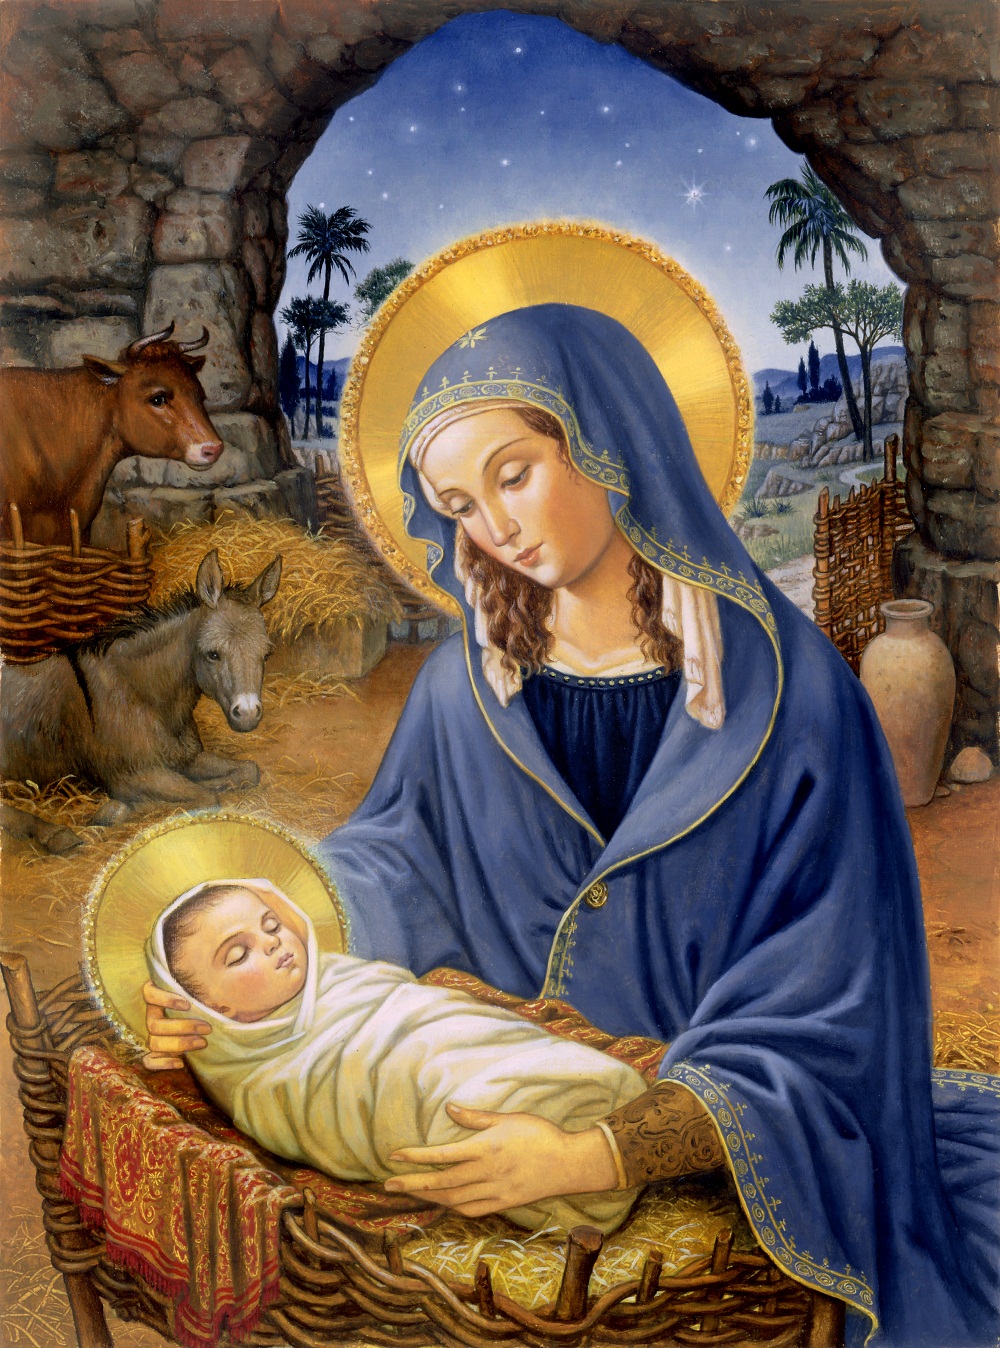 "The Nativity" by Ruth Sanderson, from the Marian Library collections